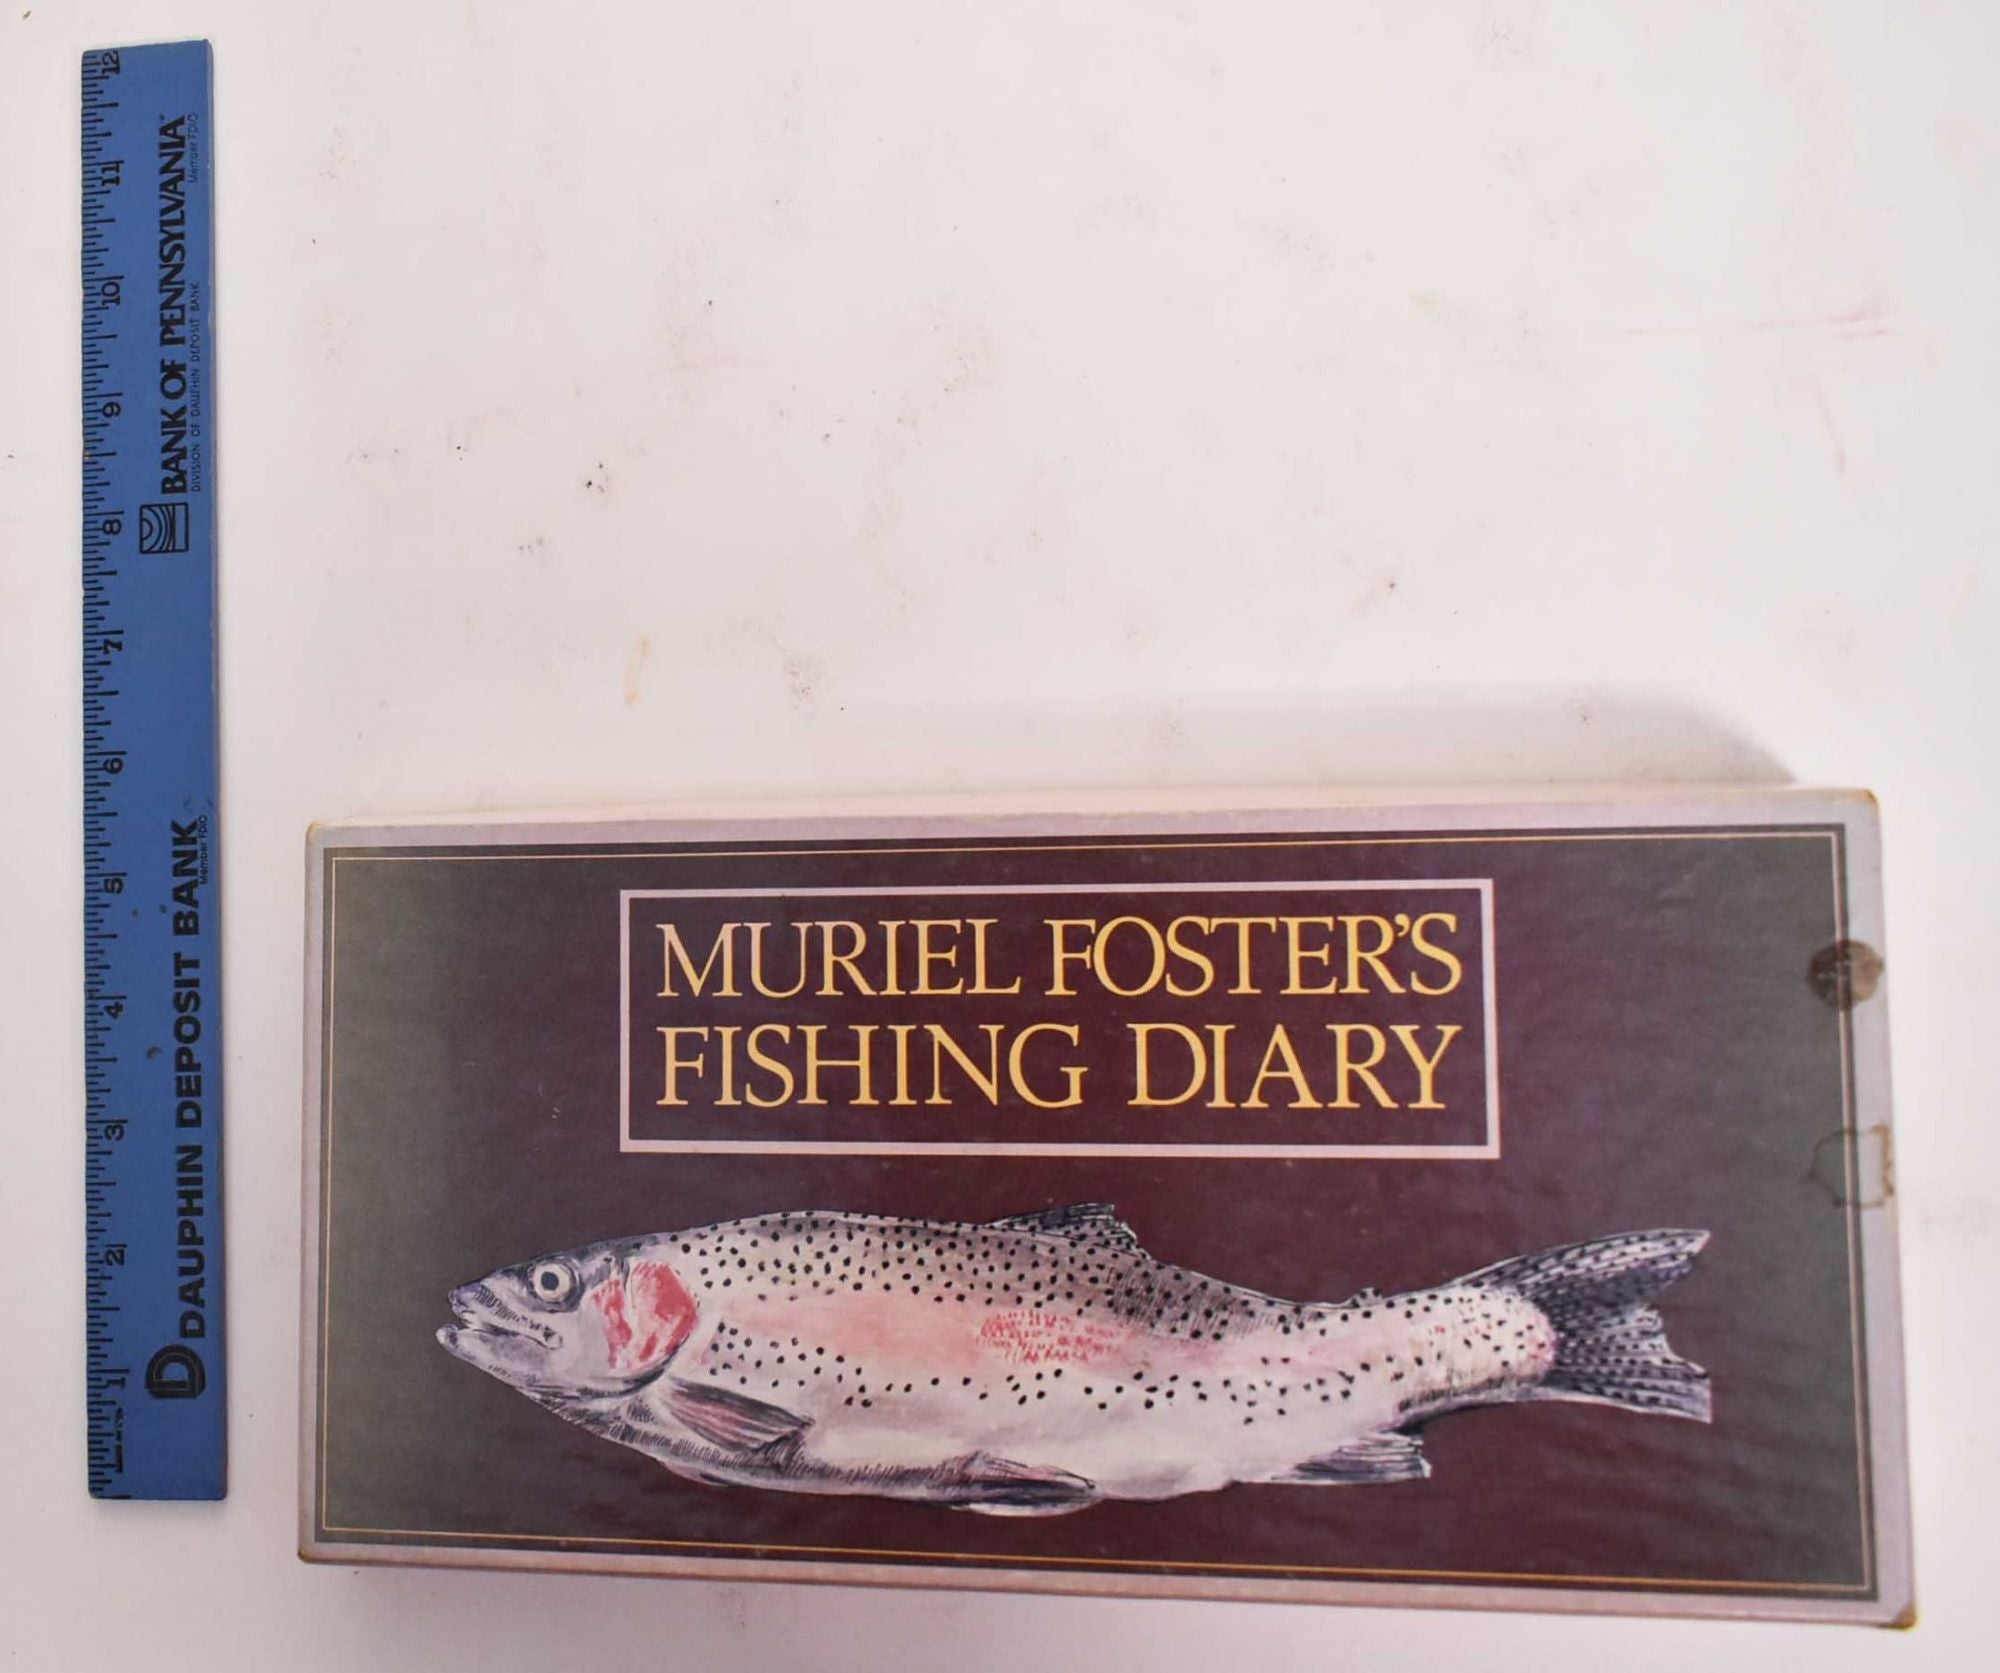 MURIEL FOSTER'S Fishing Diary